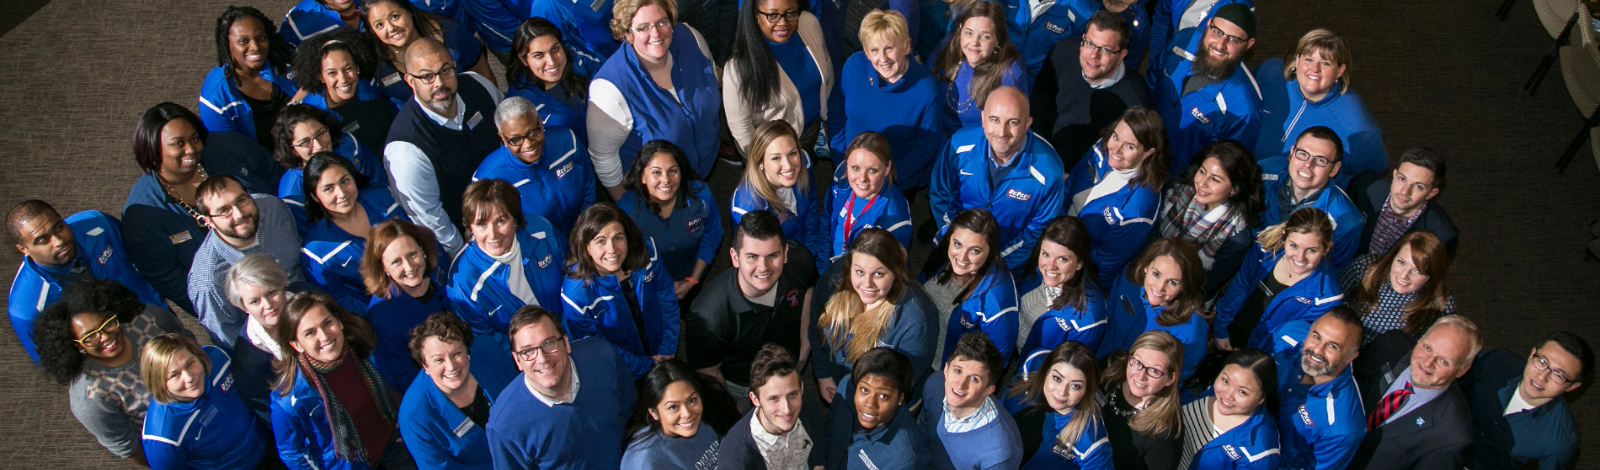 DePaul Staff looking up at the camera.